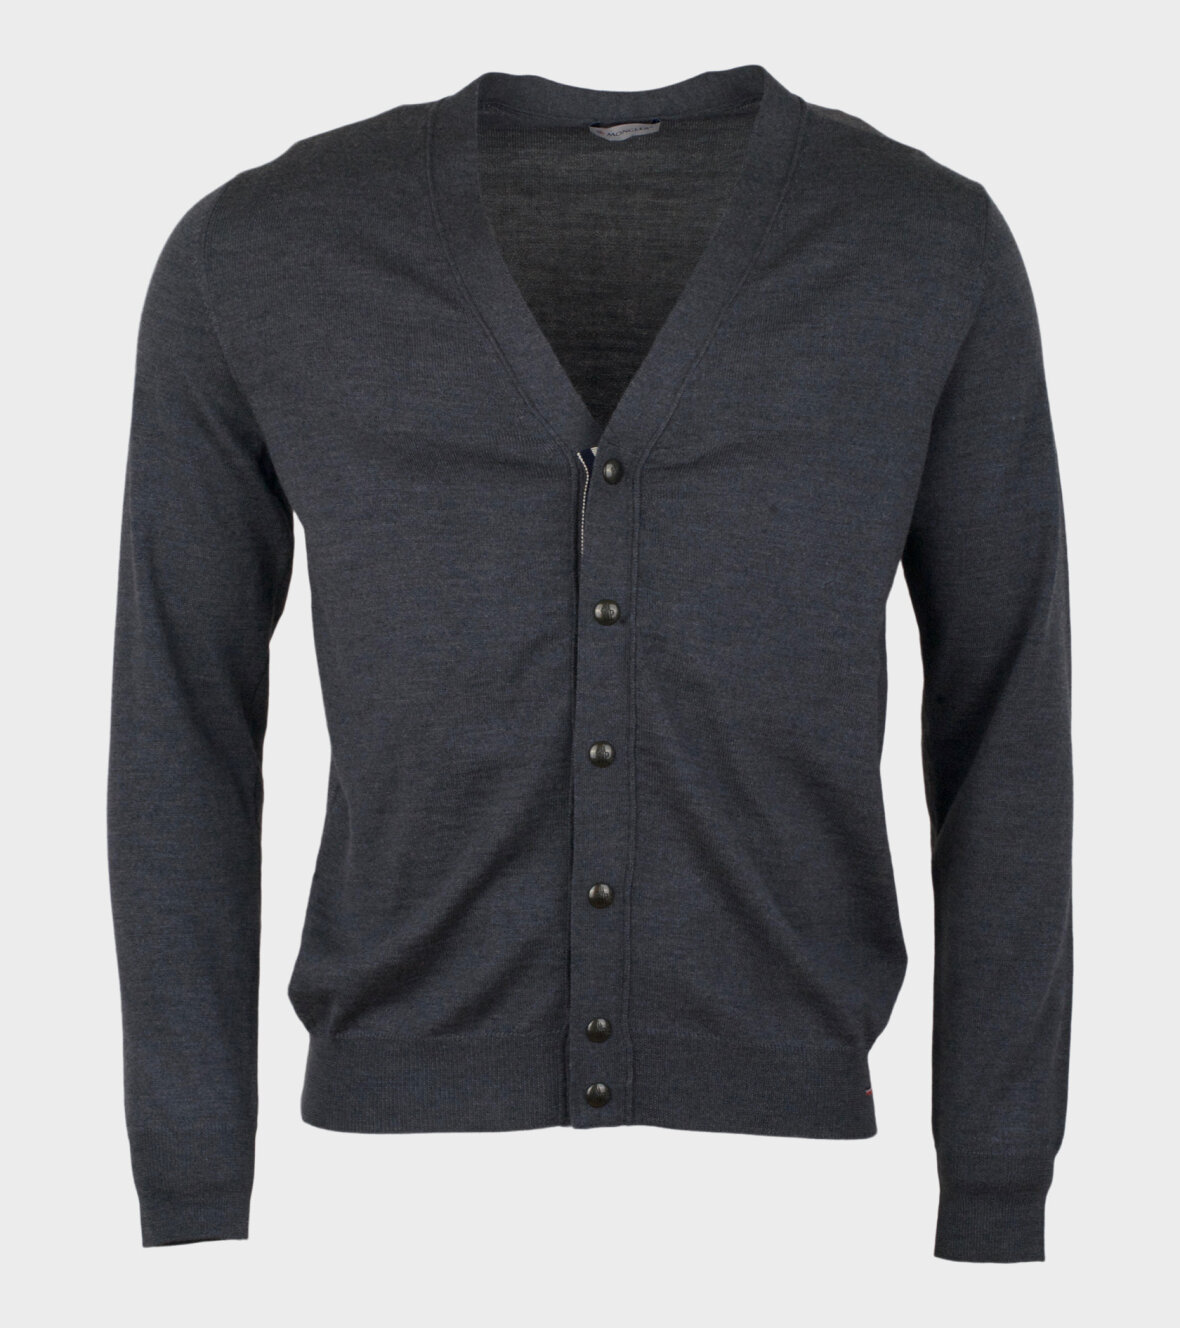 Moncler Maglione Tricot Knitted Cardigan Grey - dr. Adams